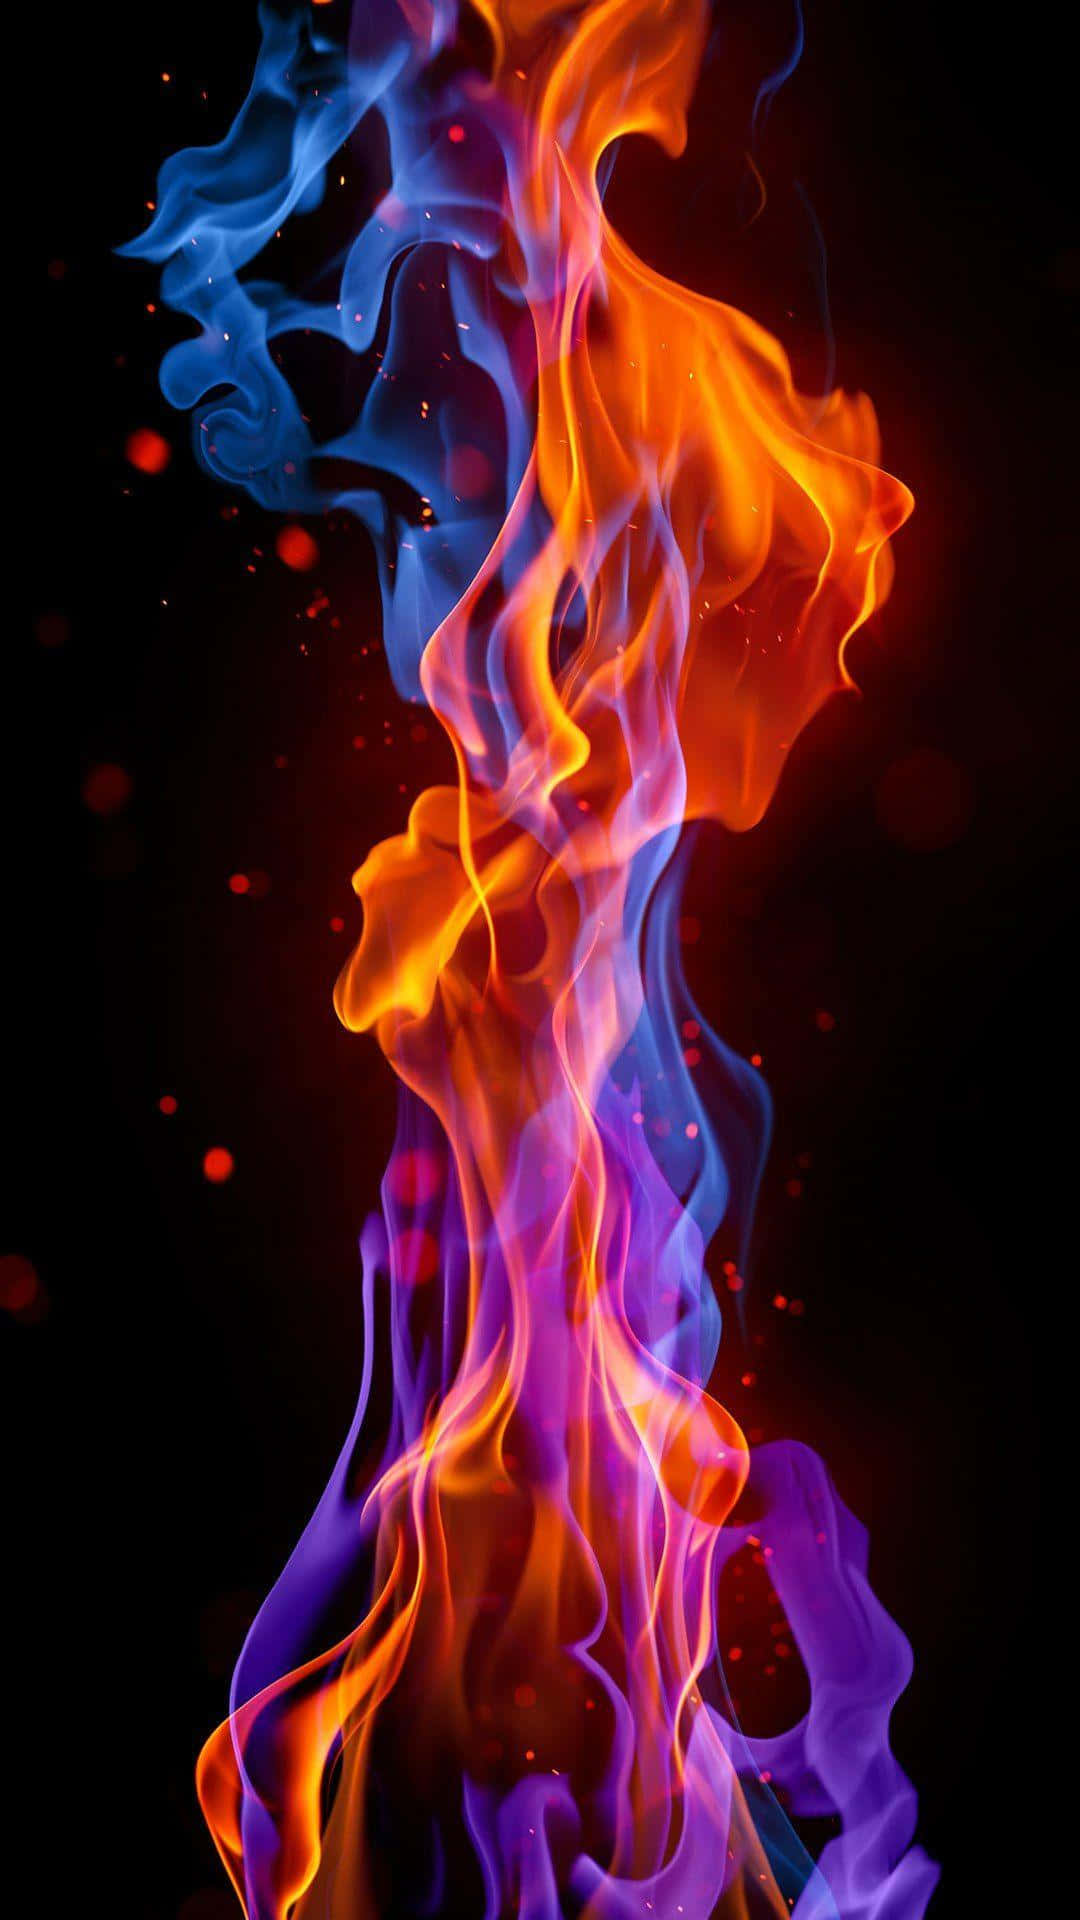 "The Mysterious, Powerful Color of Red and Blue Fire" Wallpaper